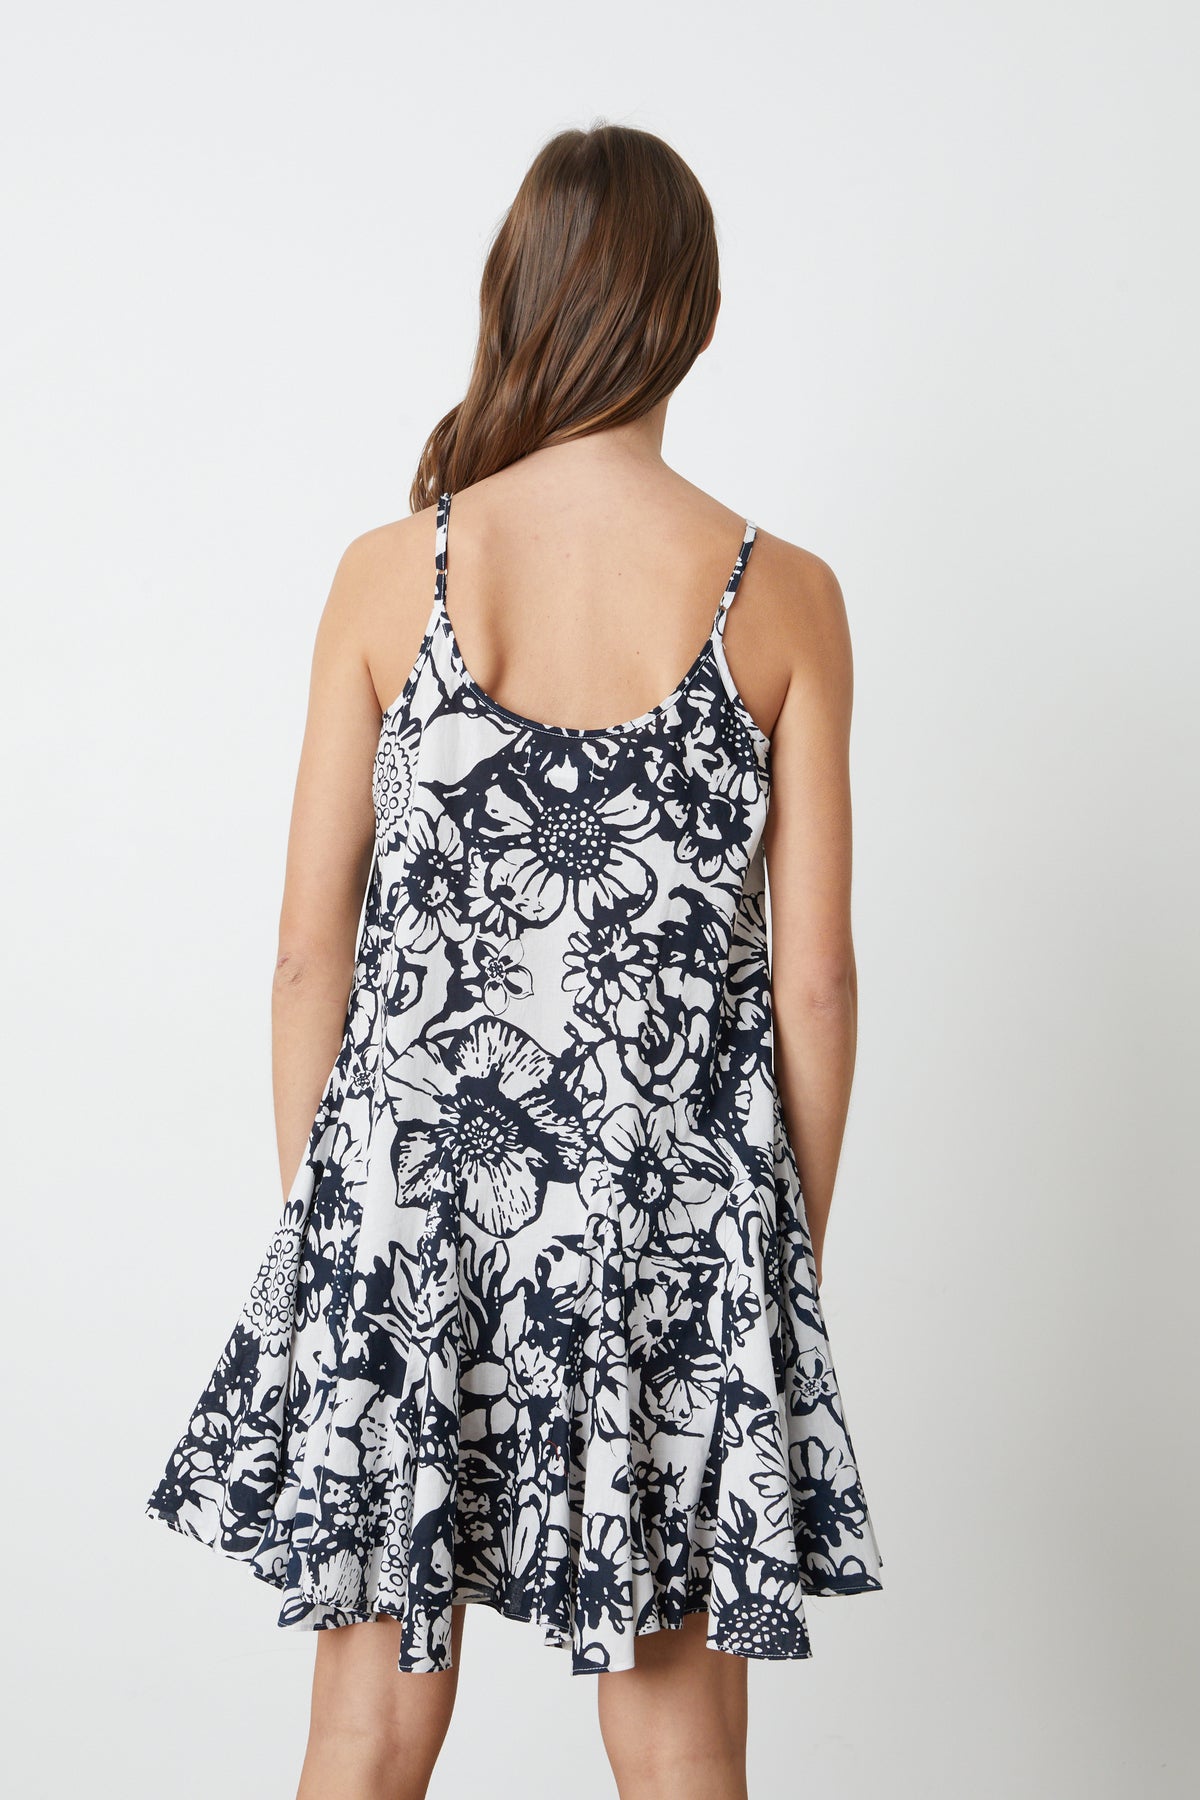   The back view of a woman wearing a Velvet by Graham & Spencer VIVIAN PRINTED DRESS. 